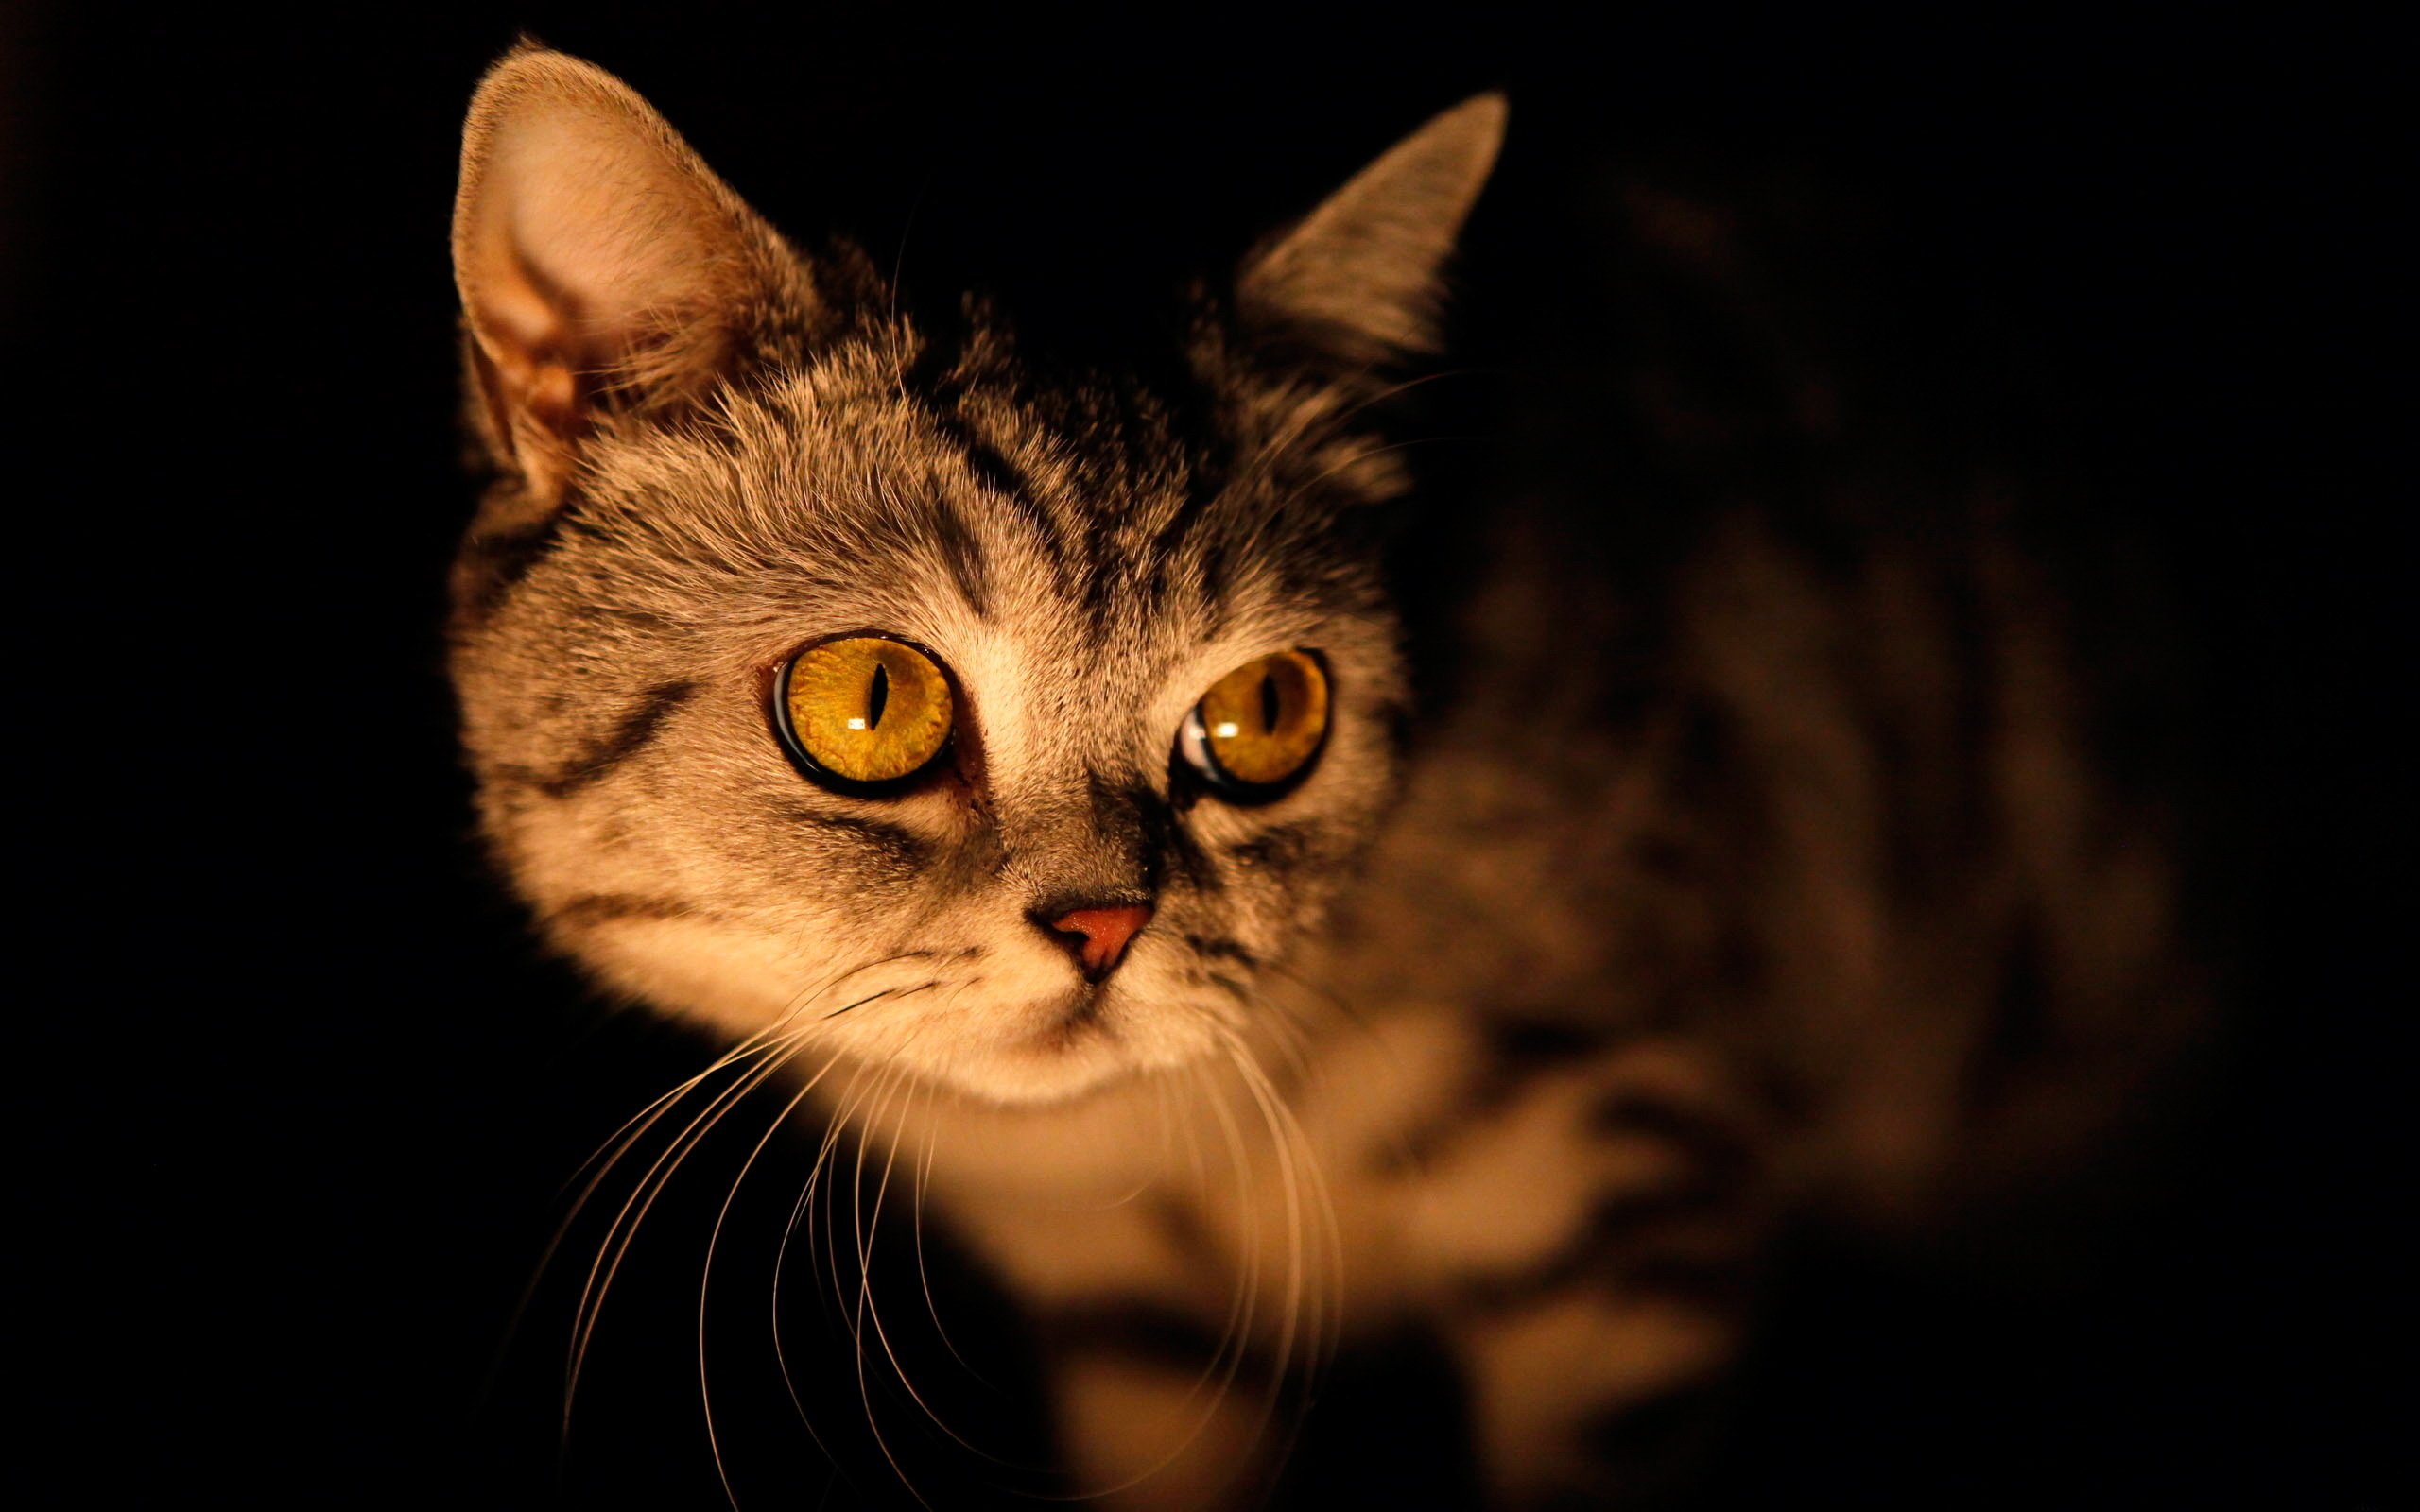 How do cats see at night?